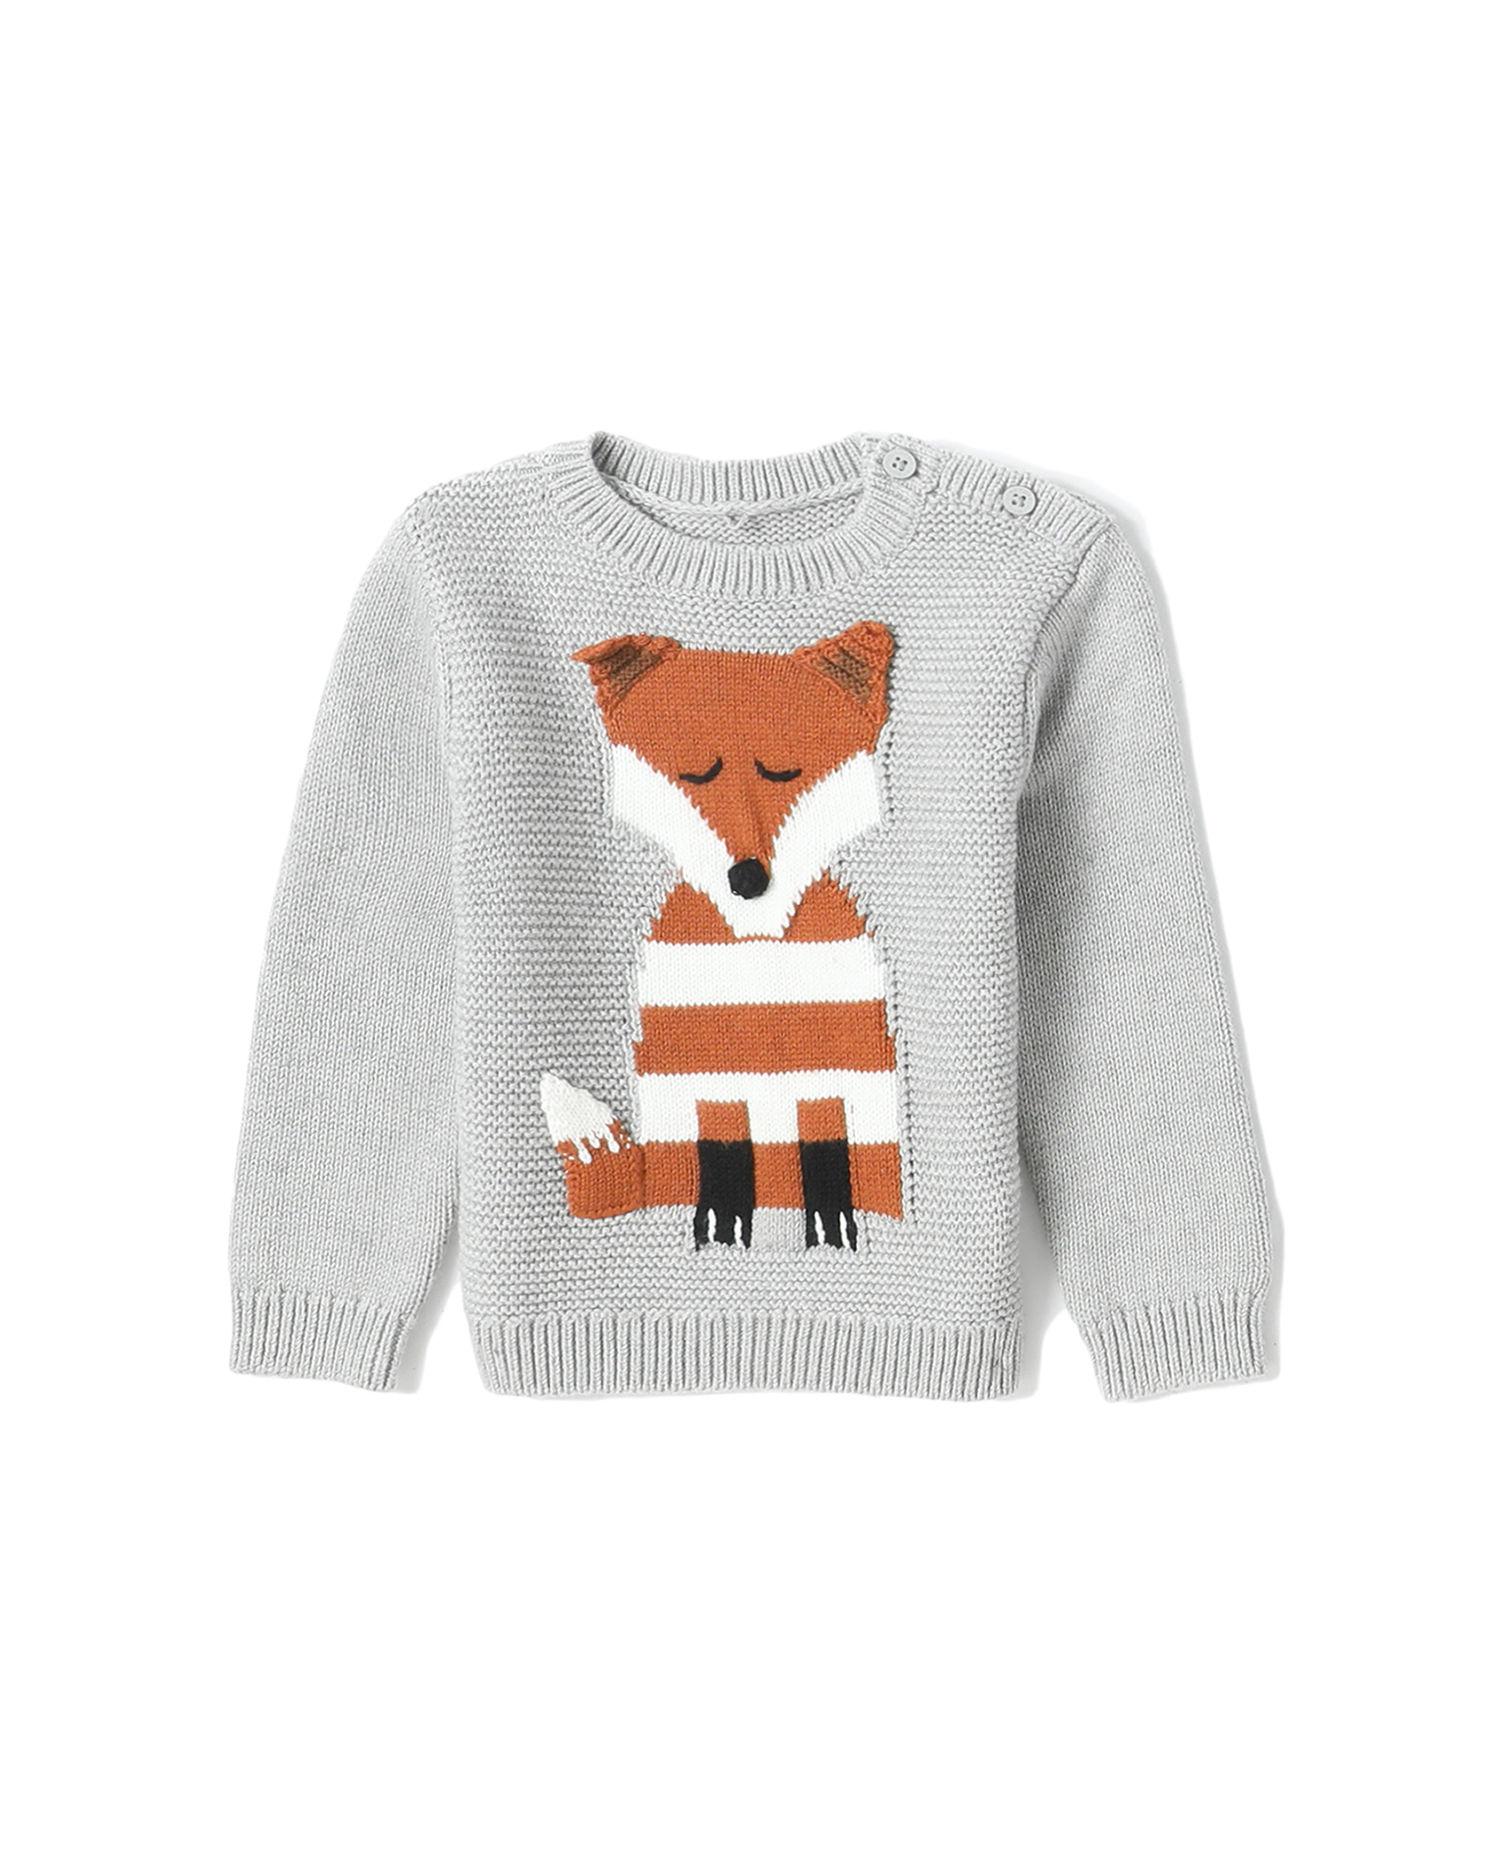 Knitted embroidered fox jumper by STELLA MCCARTNEY